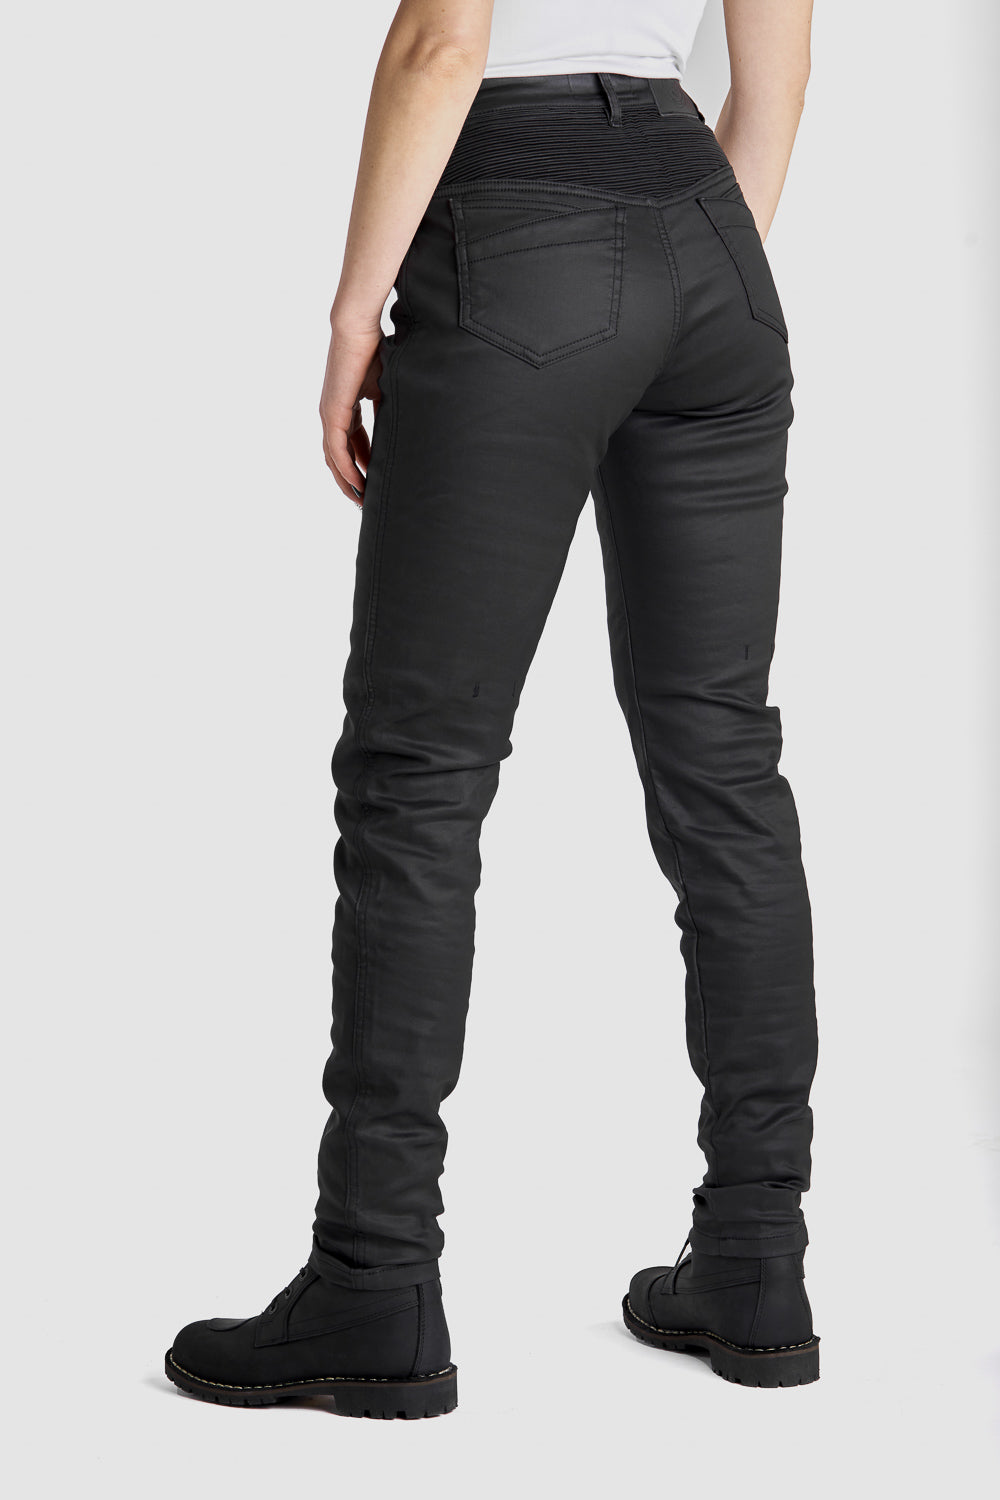 A back of a woman wearing women&#39;s black motorcycle jeans Lorica Kevlar from Pando Moto